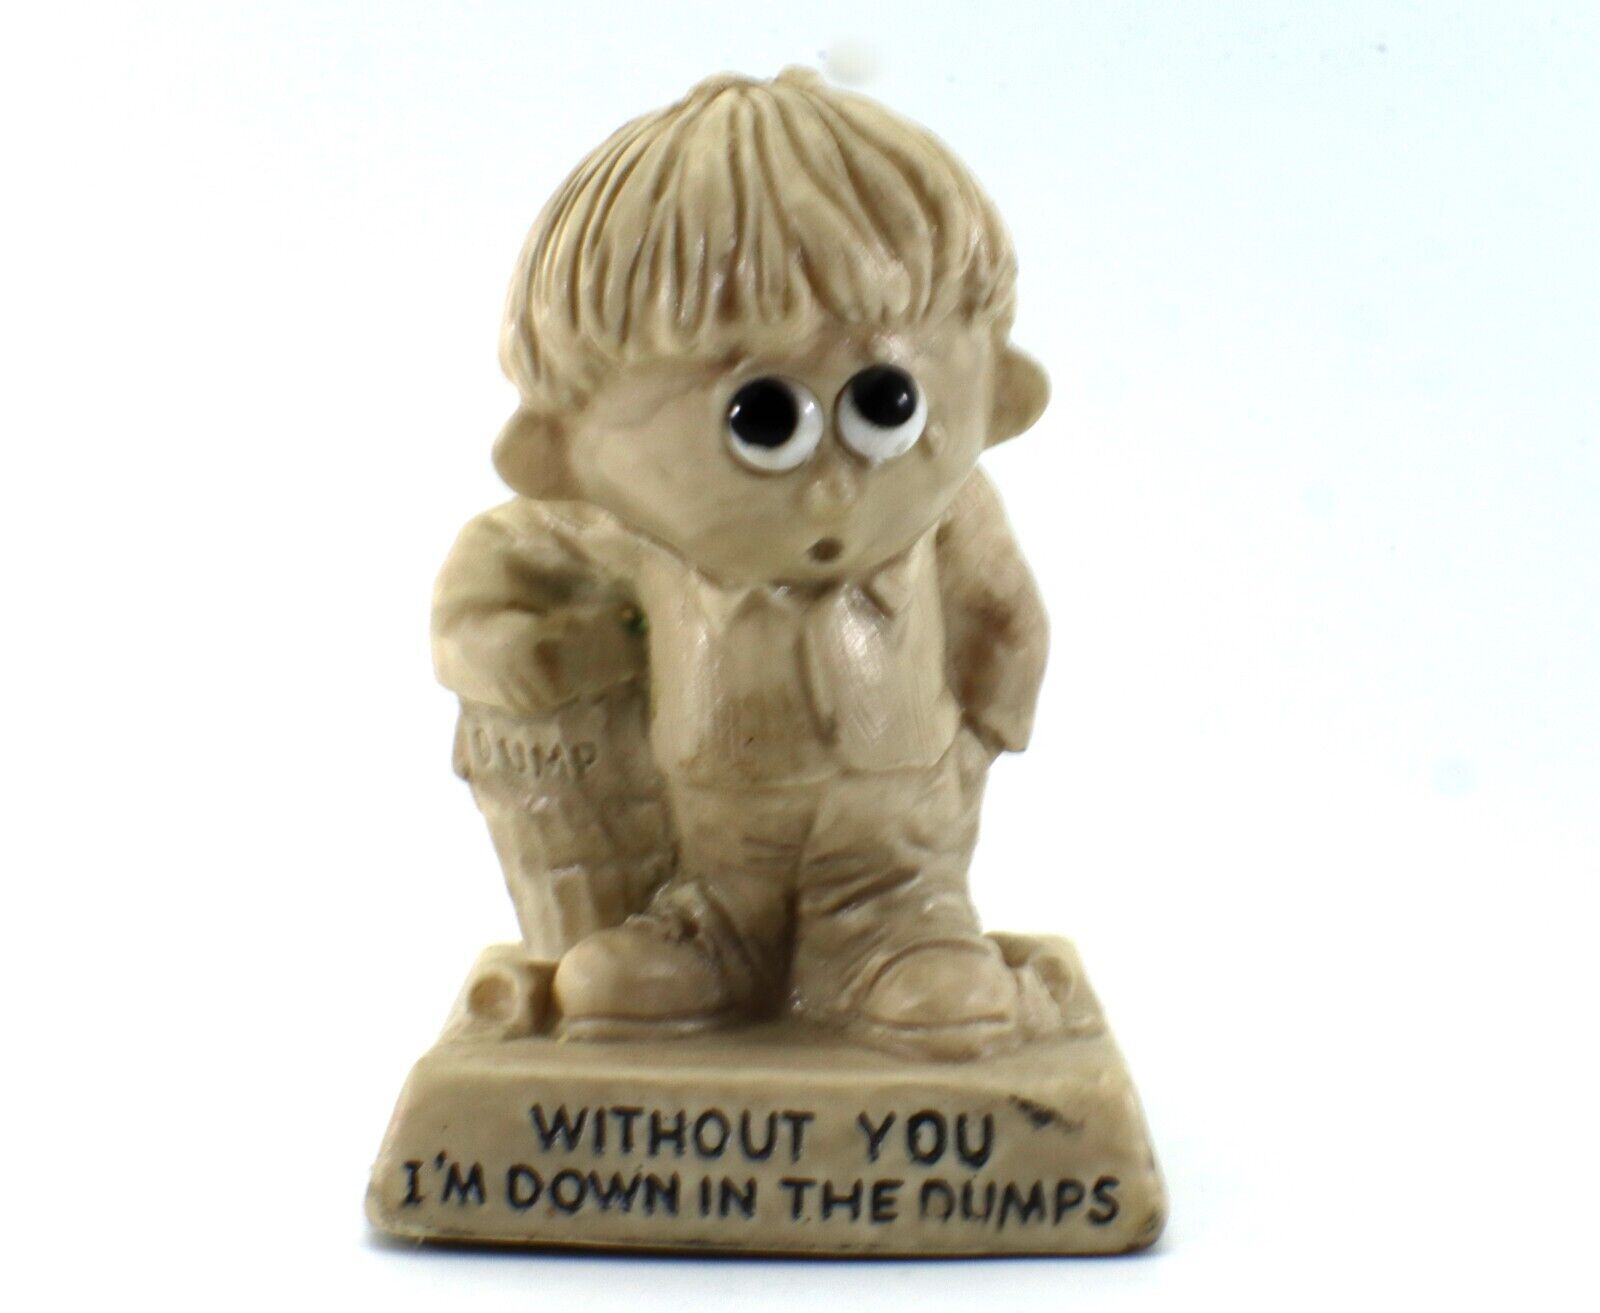 Russ Berrie Figurine WITHOUT YOU IM DOWN IN THE DUMPS Whimsical USA 1969 Vintage